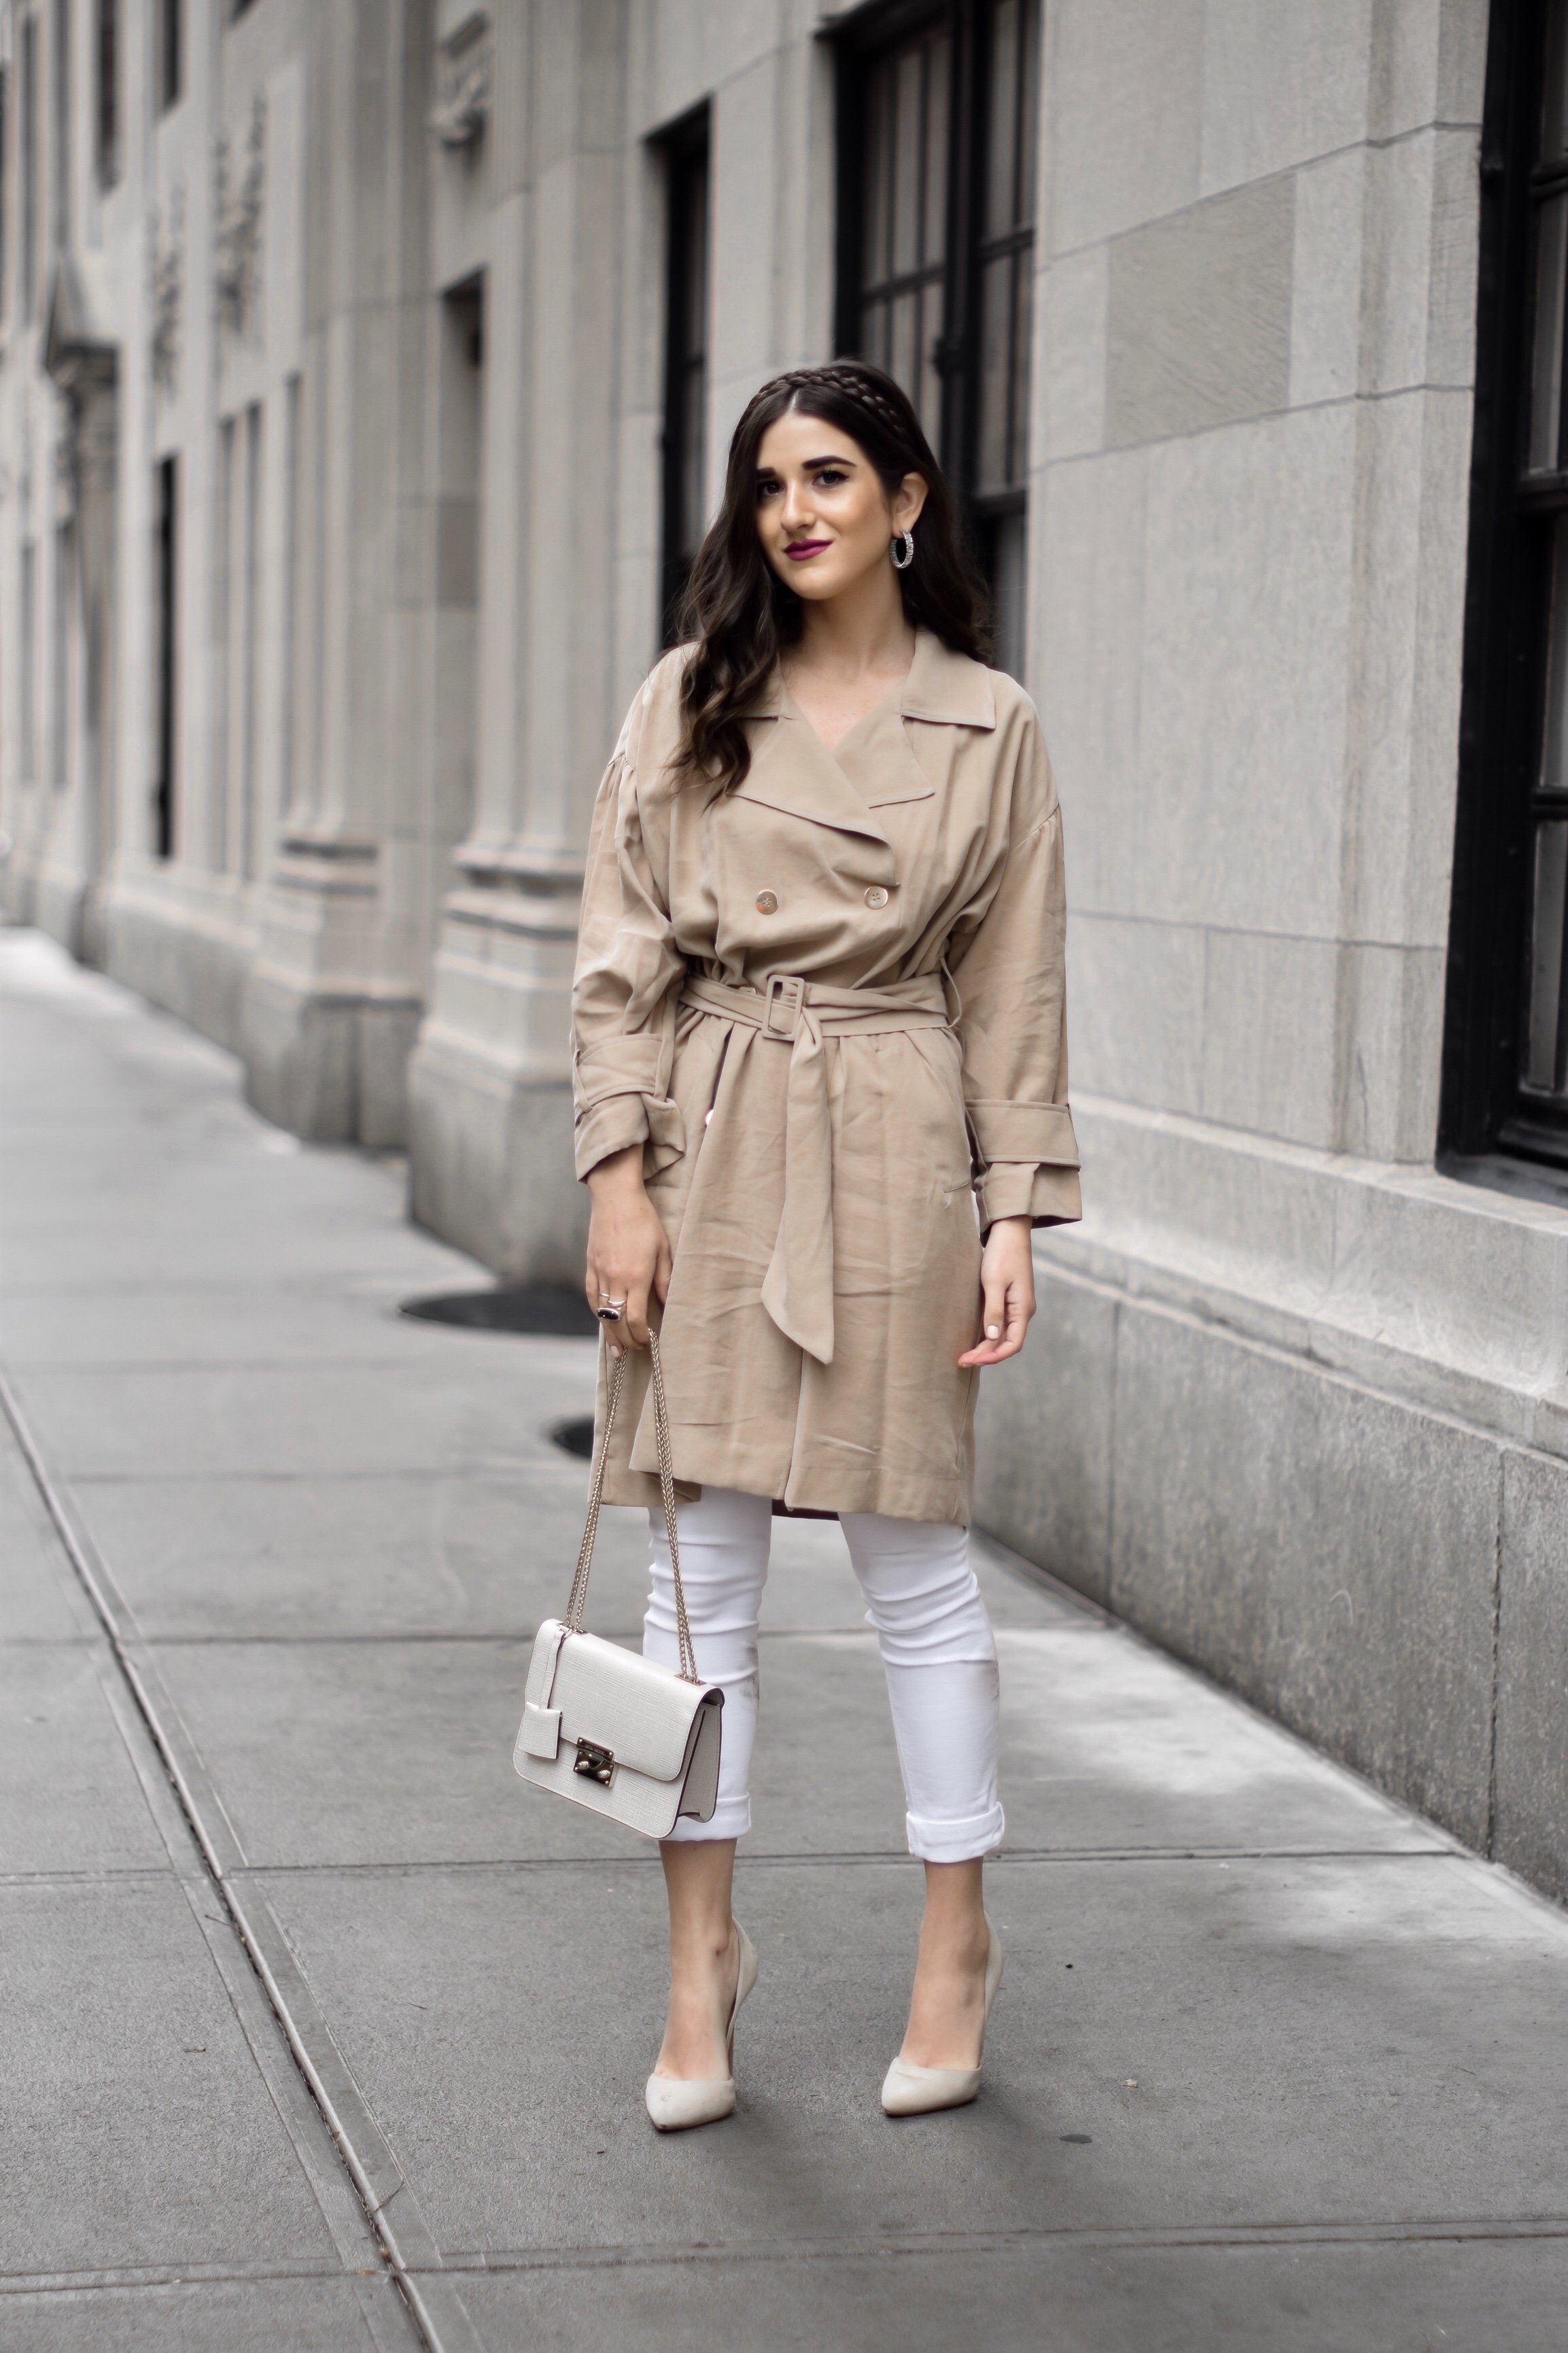 All About Me Trench Coat Dress White Jeans Esther Santer Fashion Blog NYC Street Style Blogger Outfit OOTD Trendy Braid Headband Nude Heels Steve Madden Zara Wear Shopping Sale Melissa Lovy Baby Serena Hoops Shoes Fall  Look Buy Henri Bendel Bag Purse.jpg